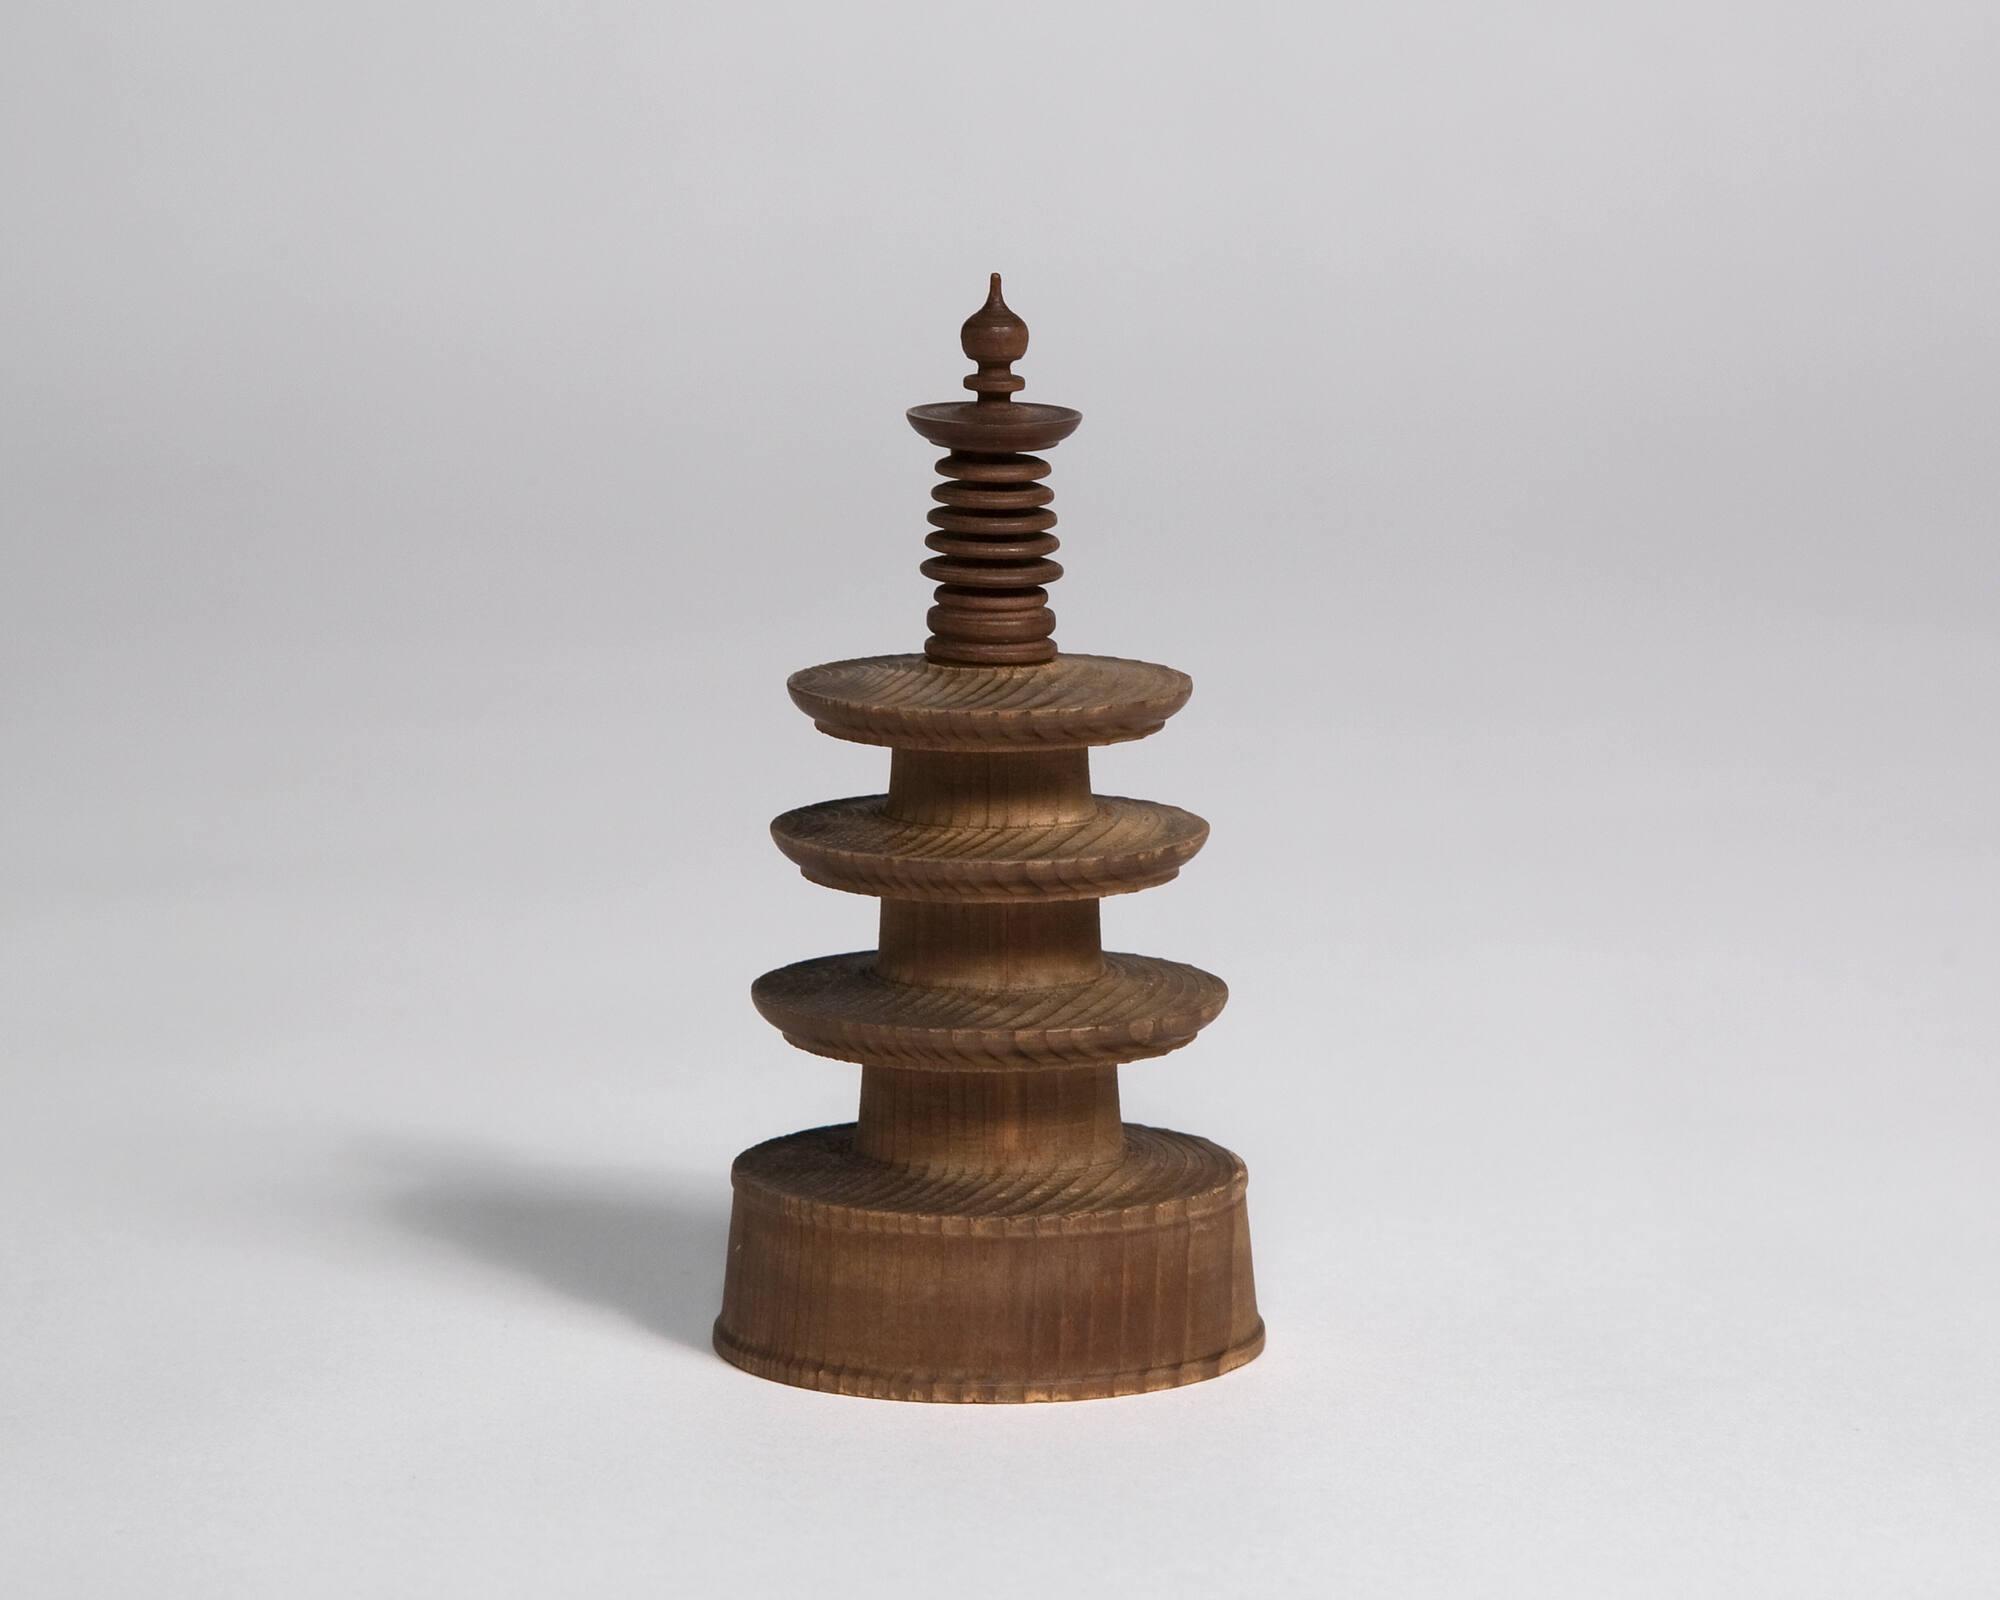 Small carved wooden pagoda with a round base and pointed at the top, constructed by Nirro Chunosuke.